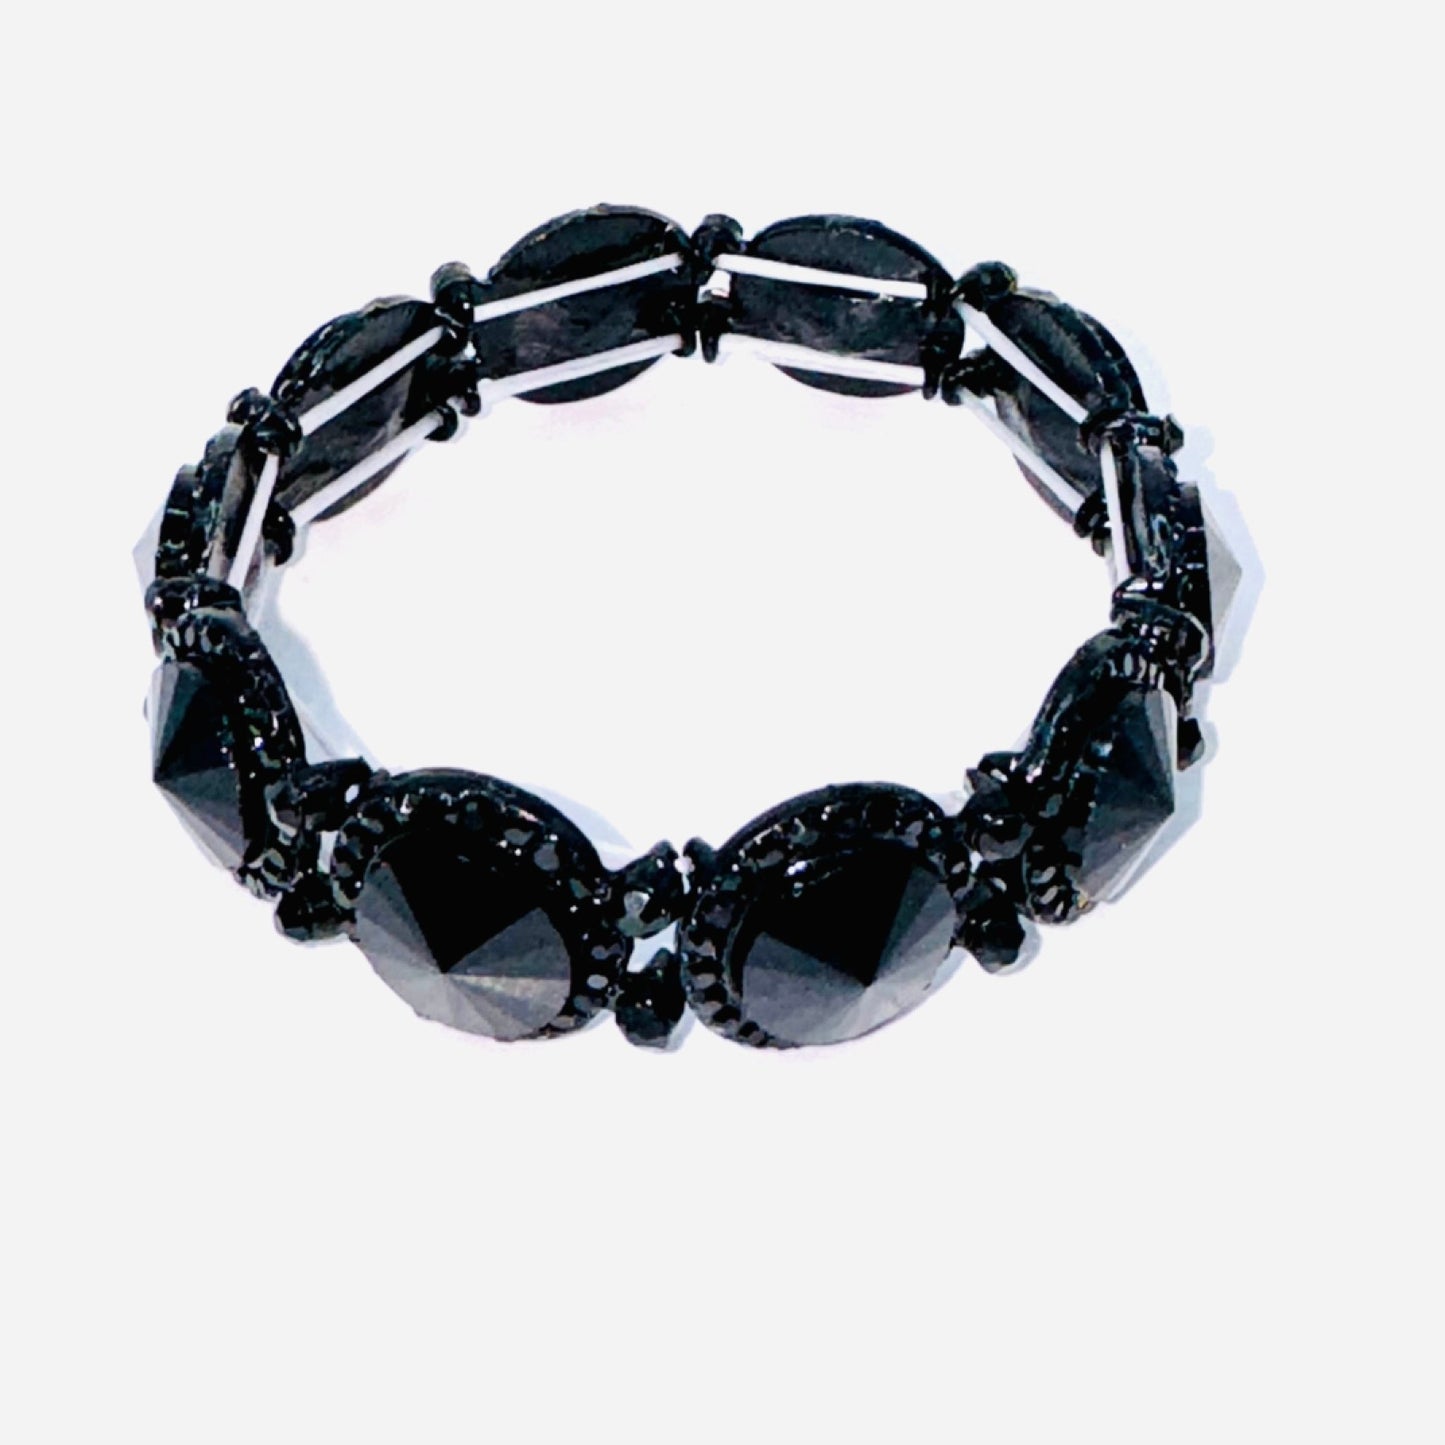 All Black Accessories Collection - House of FaSHUN by Shun Melson